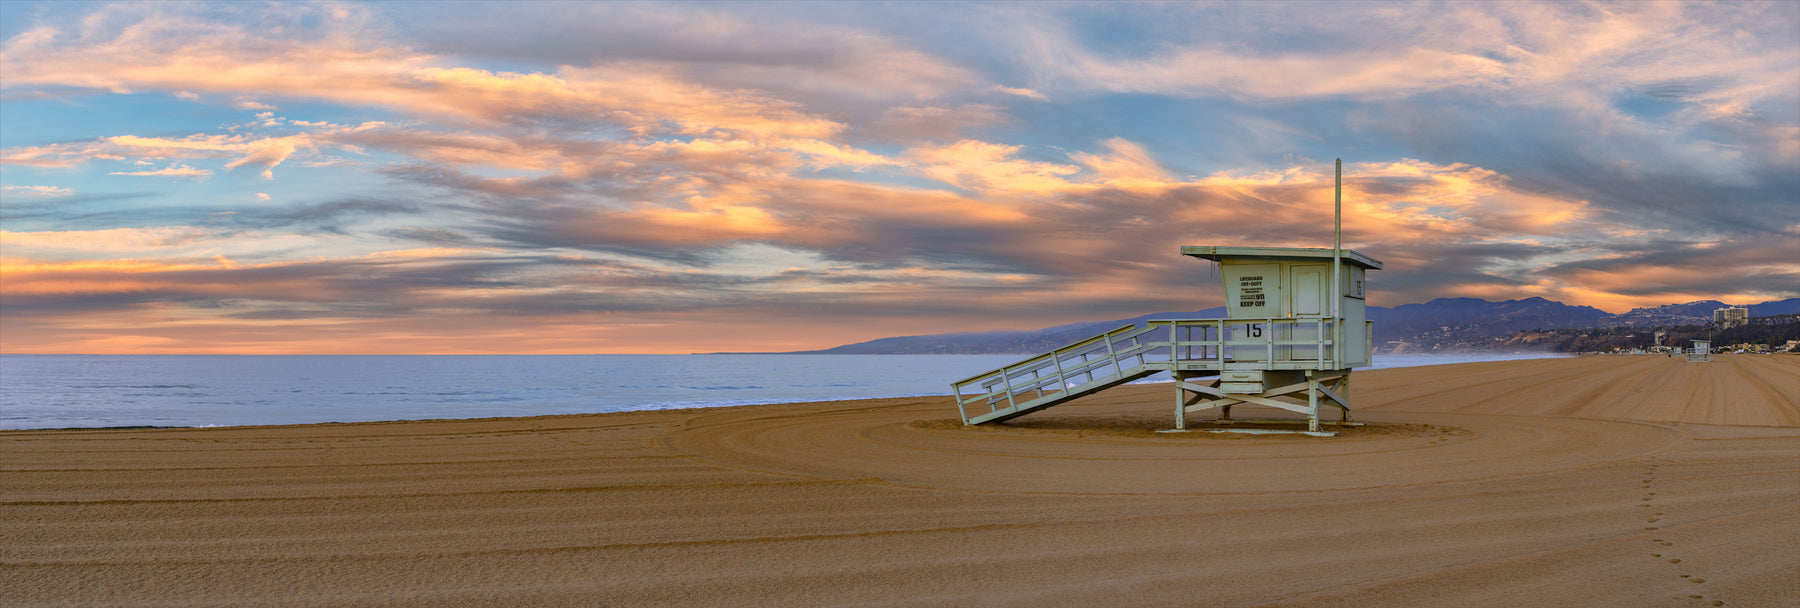 Witness the tranquil beauty of Santa Monica at sunrise, where a solitary lifeguard shack stands against a canvas of pastel skies.